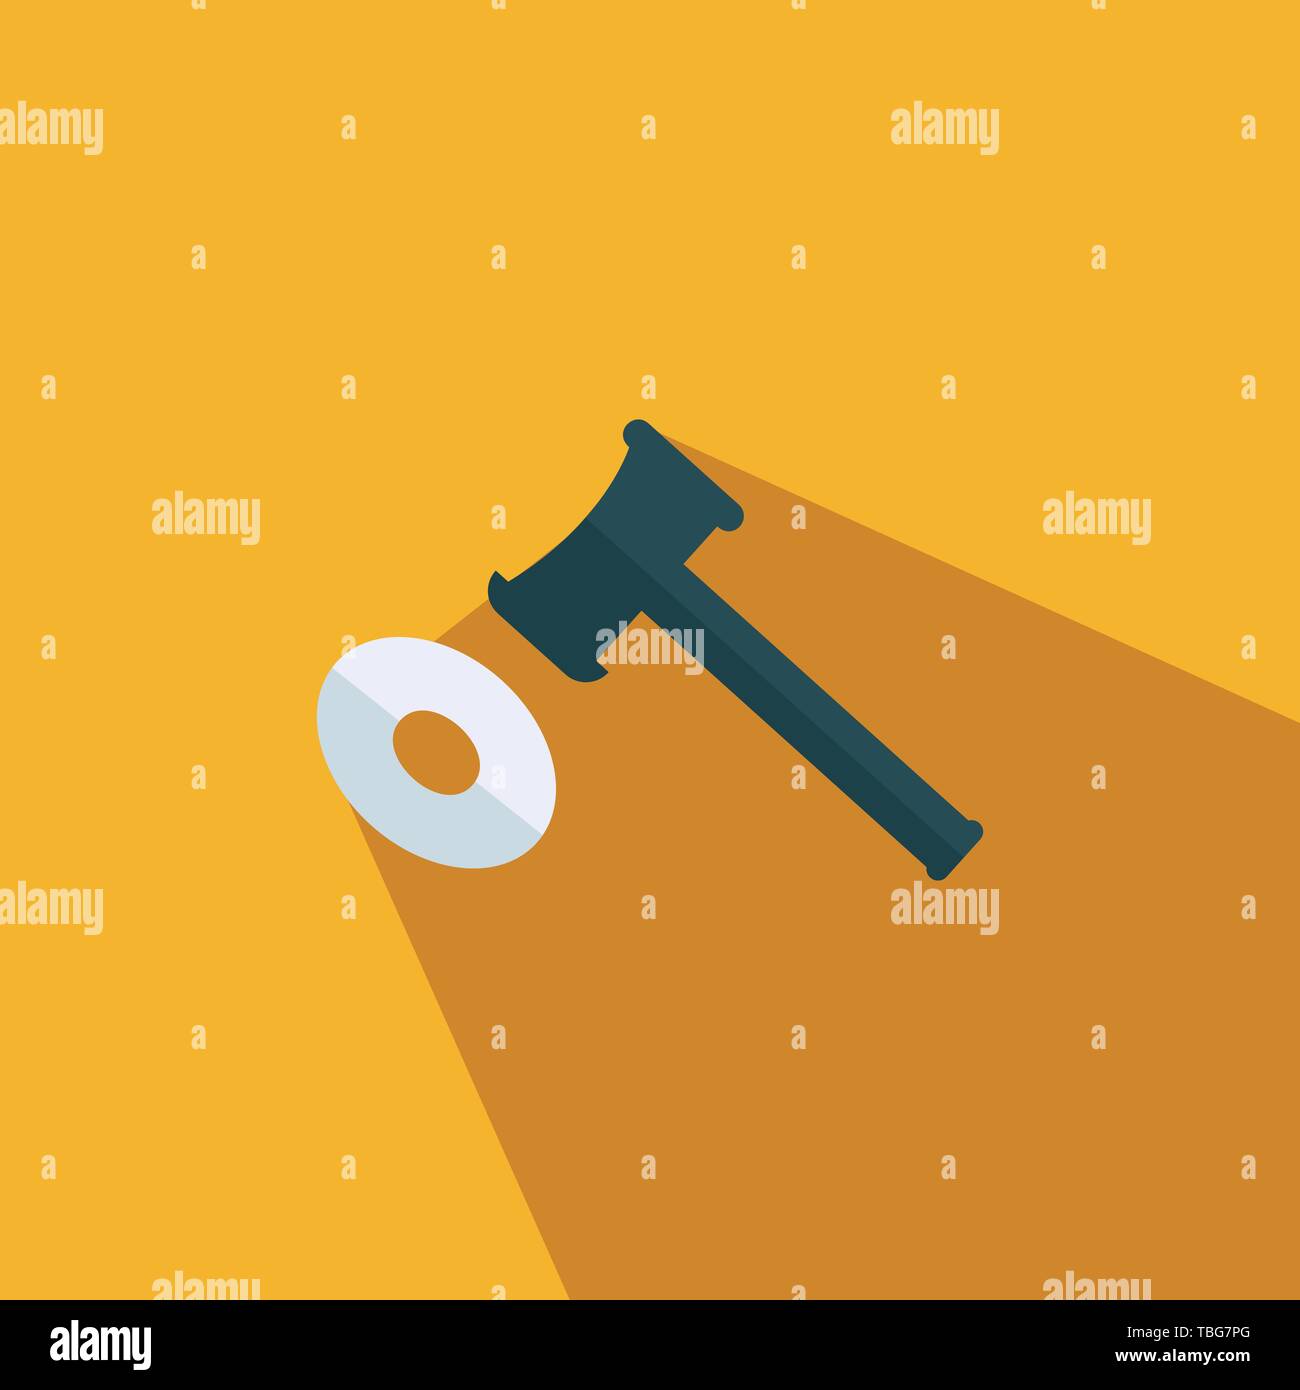 Financial sign - Hammer flat icon Stock Vector